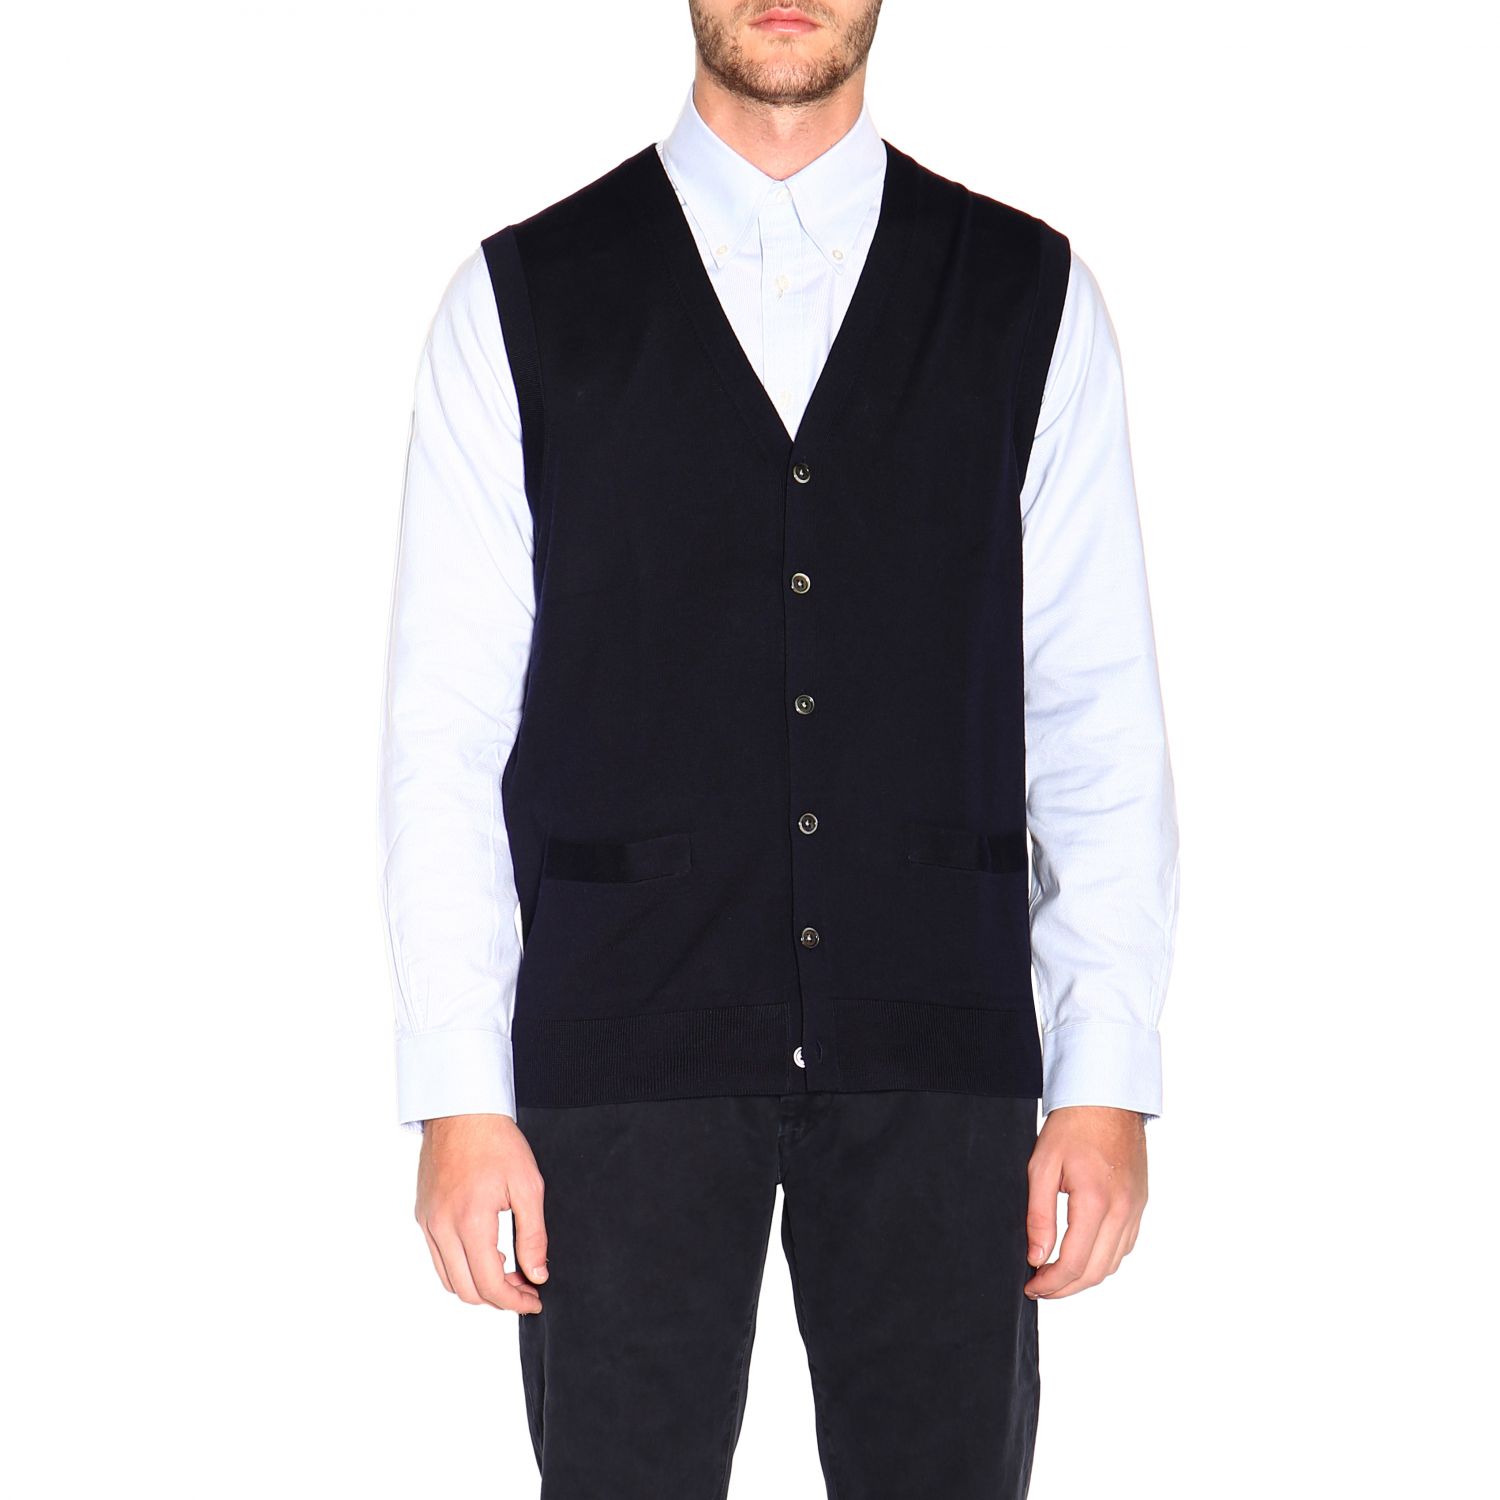 Brooks Brothers Outlet: Waistcoat men 